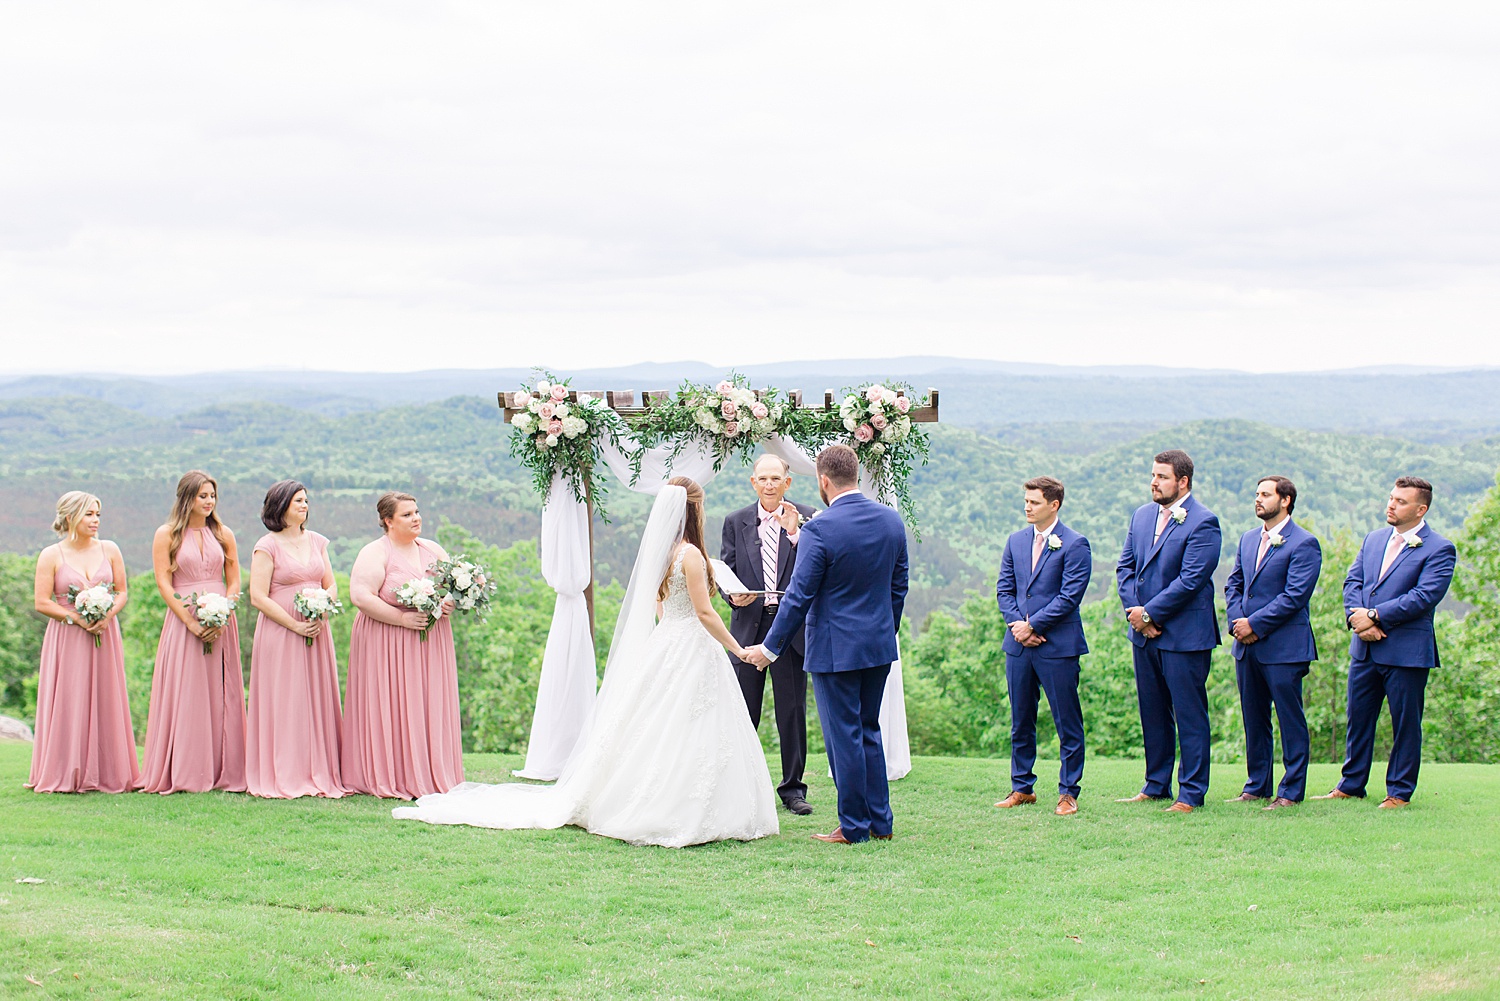 outdoor wedding ceremony with stunning natural views 